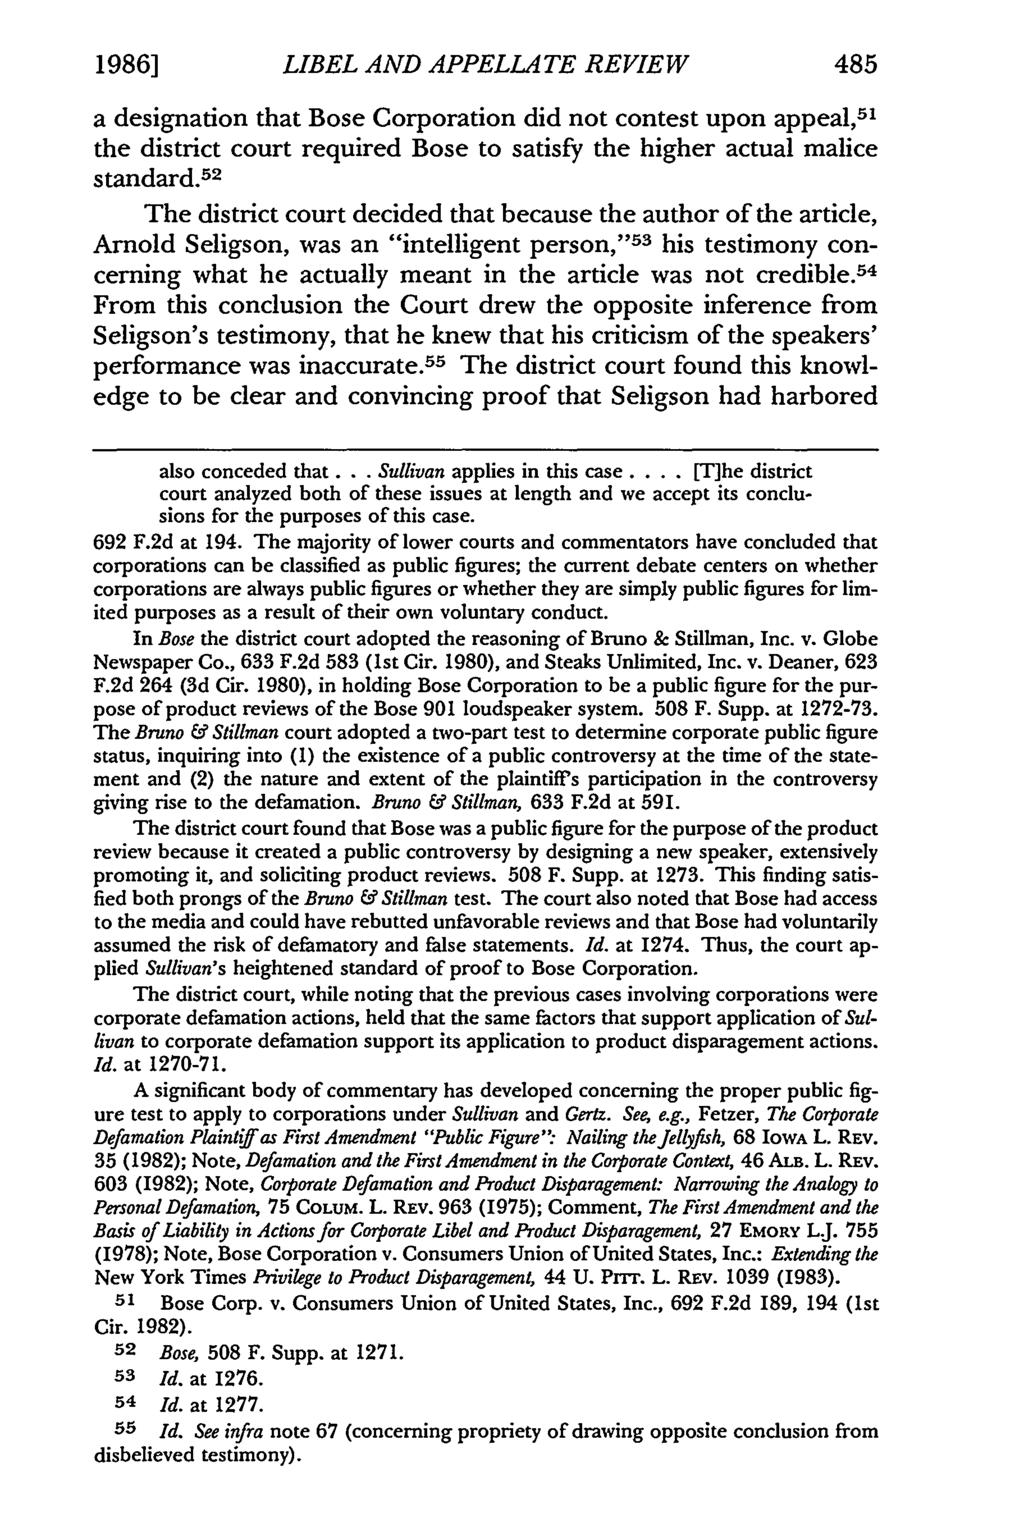 1986] LIBEL AND APPELLATE REVIEW 485 a designation that Bose Corporation did not contest upon appeal, 5 ' the district court required Bose to satisfy the higher actual malice standard.